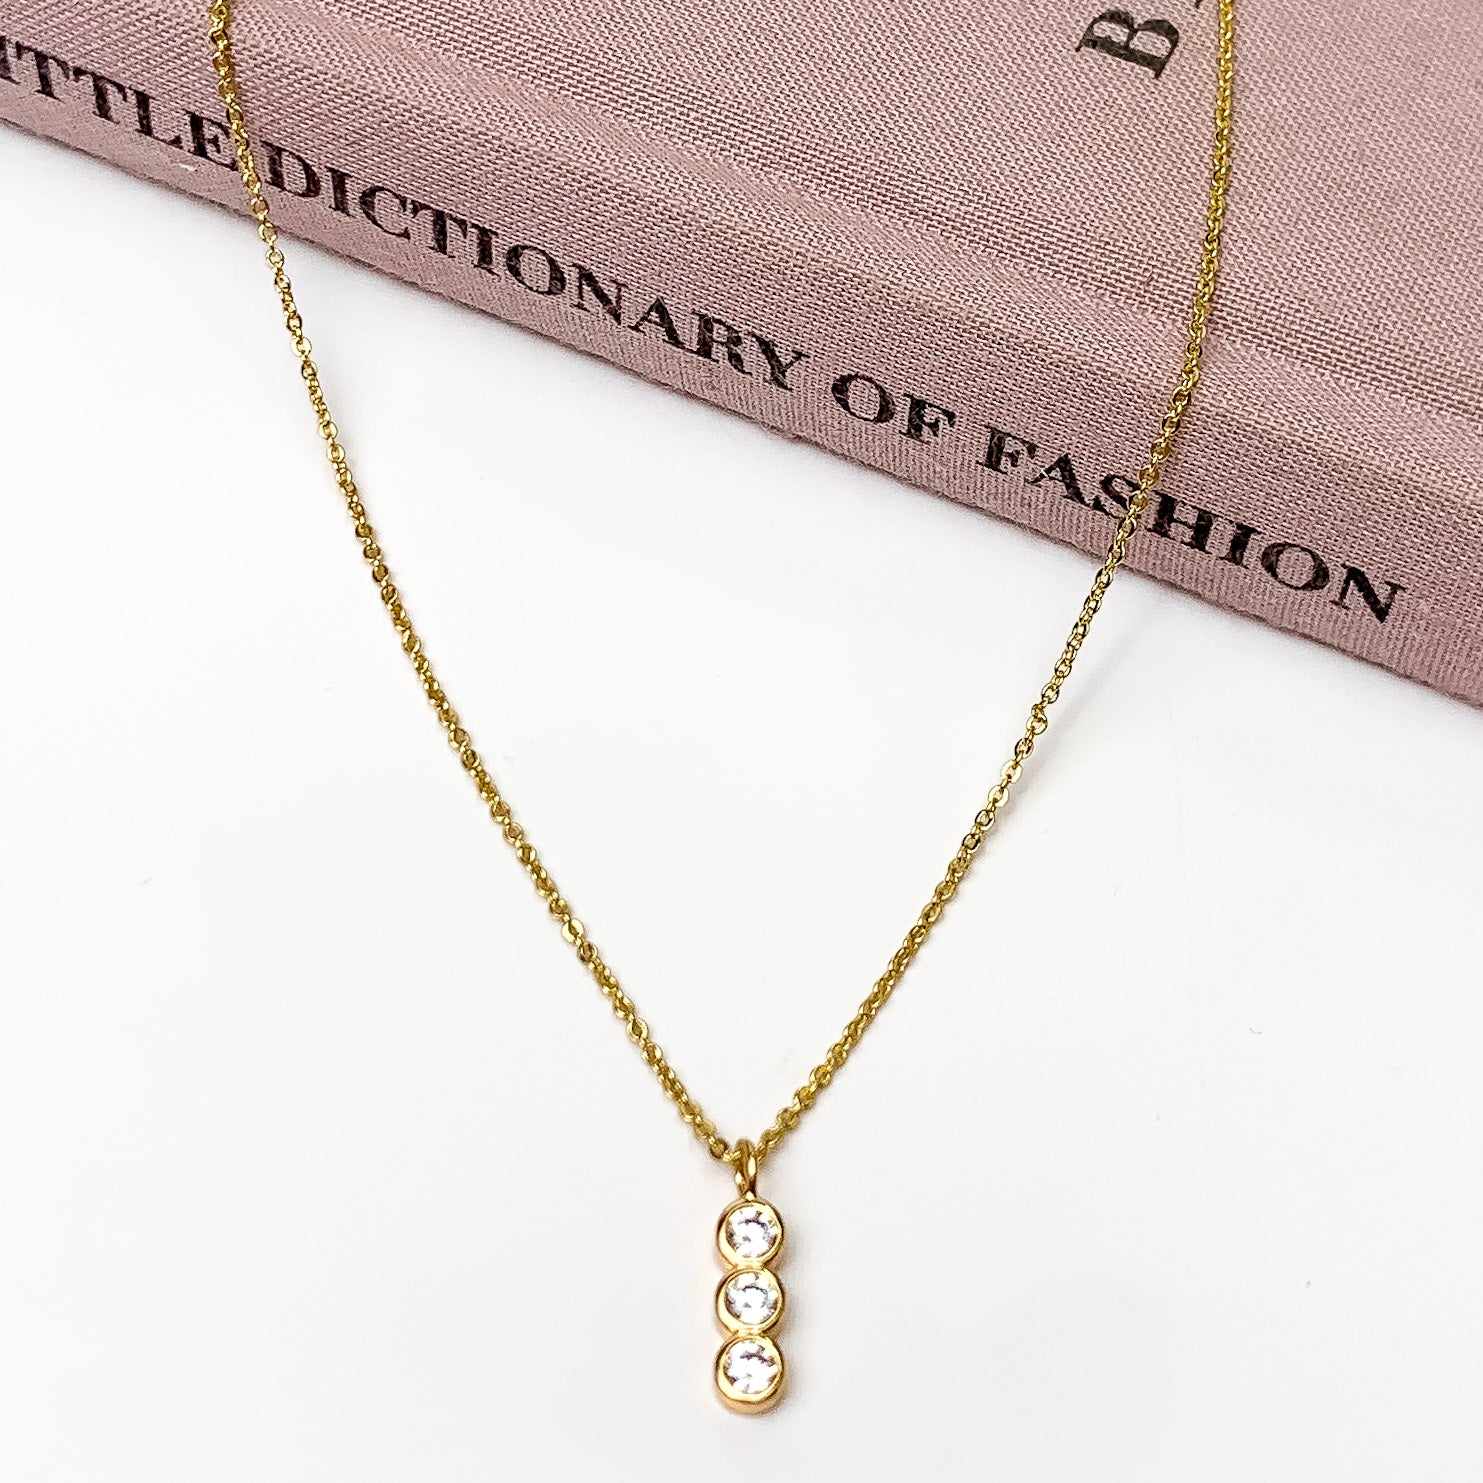 Gold Tone Necklace with Triple Clear Crystal Pendant. Pictured on a white background with the necklace laying on a book.